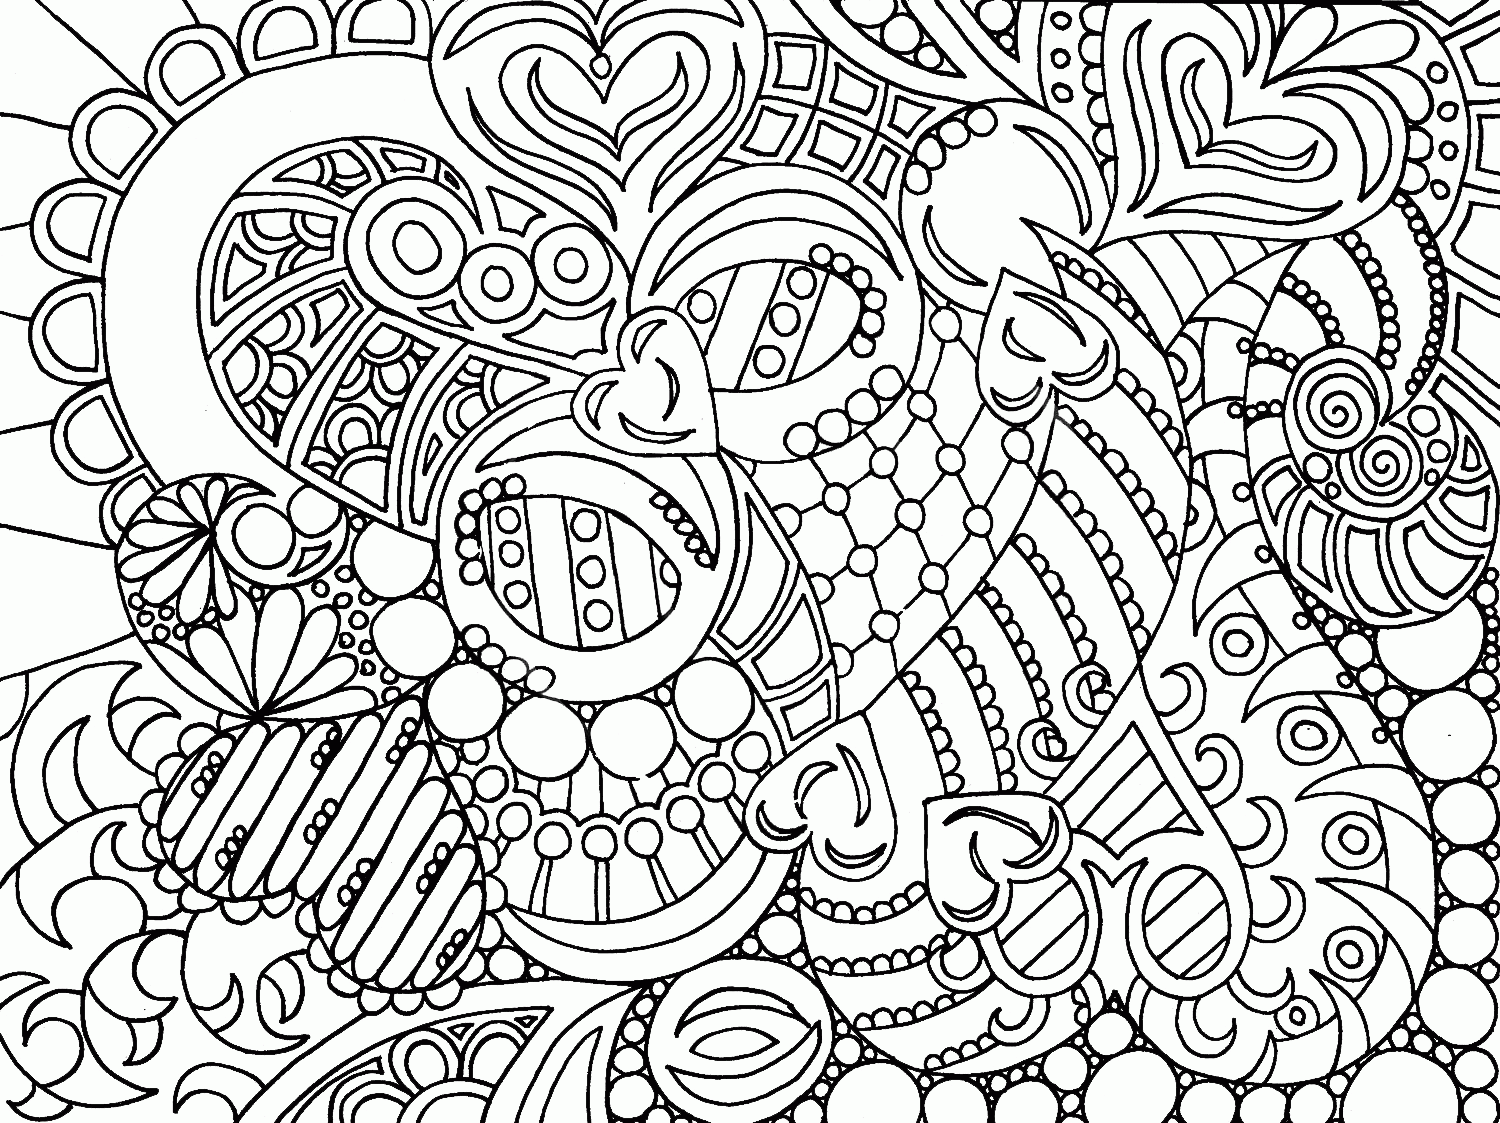 free coloring pages for adults | Only Coloring Pages